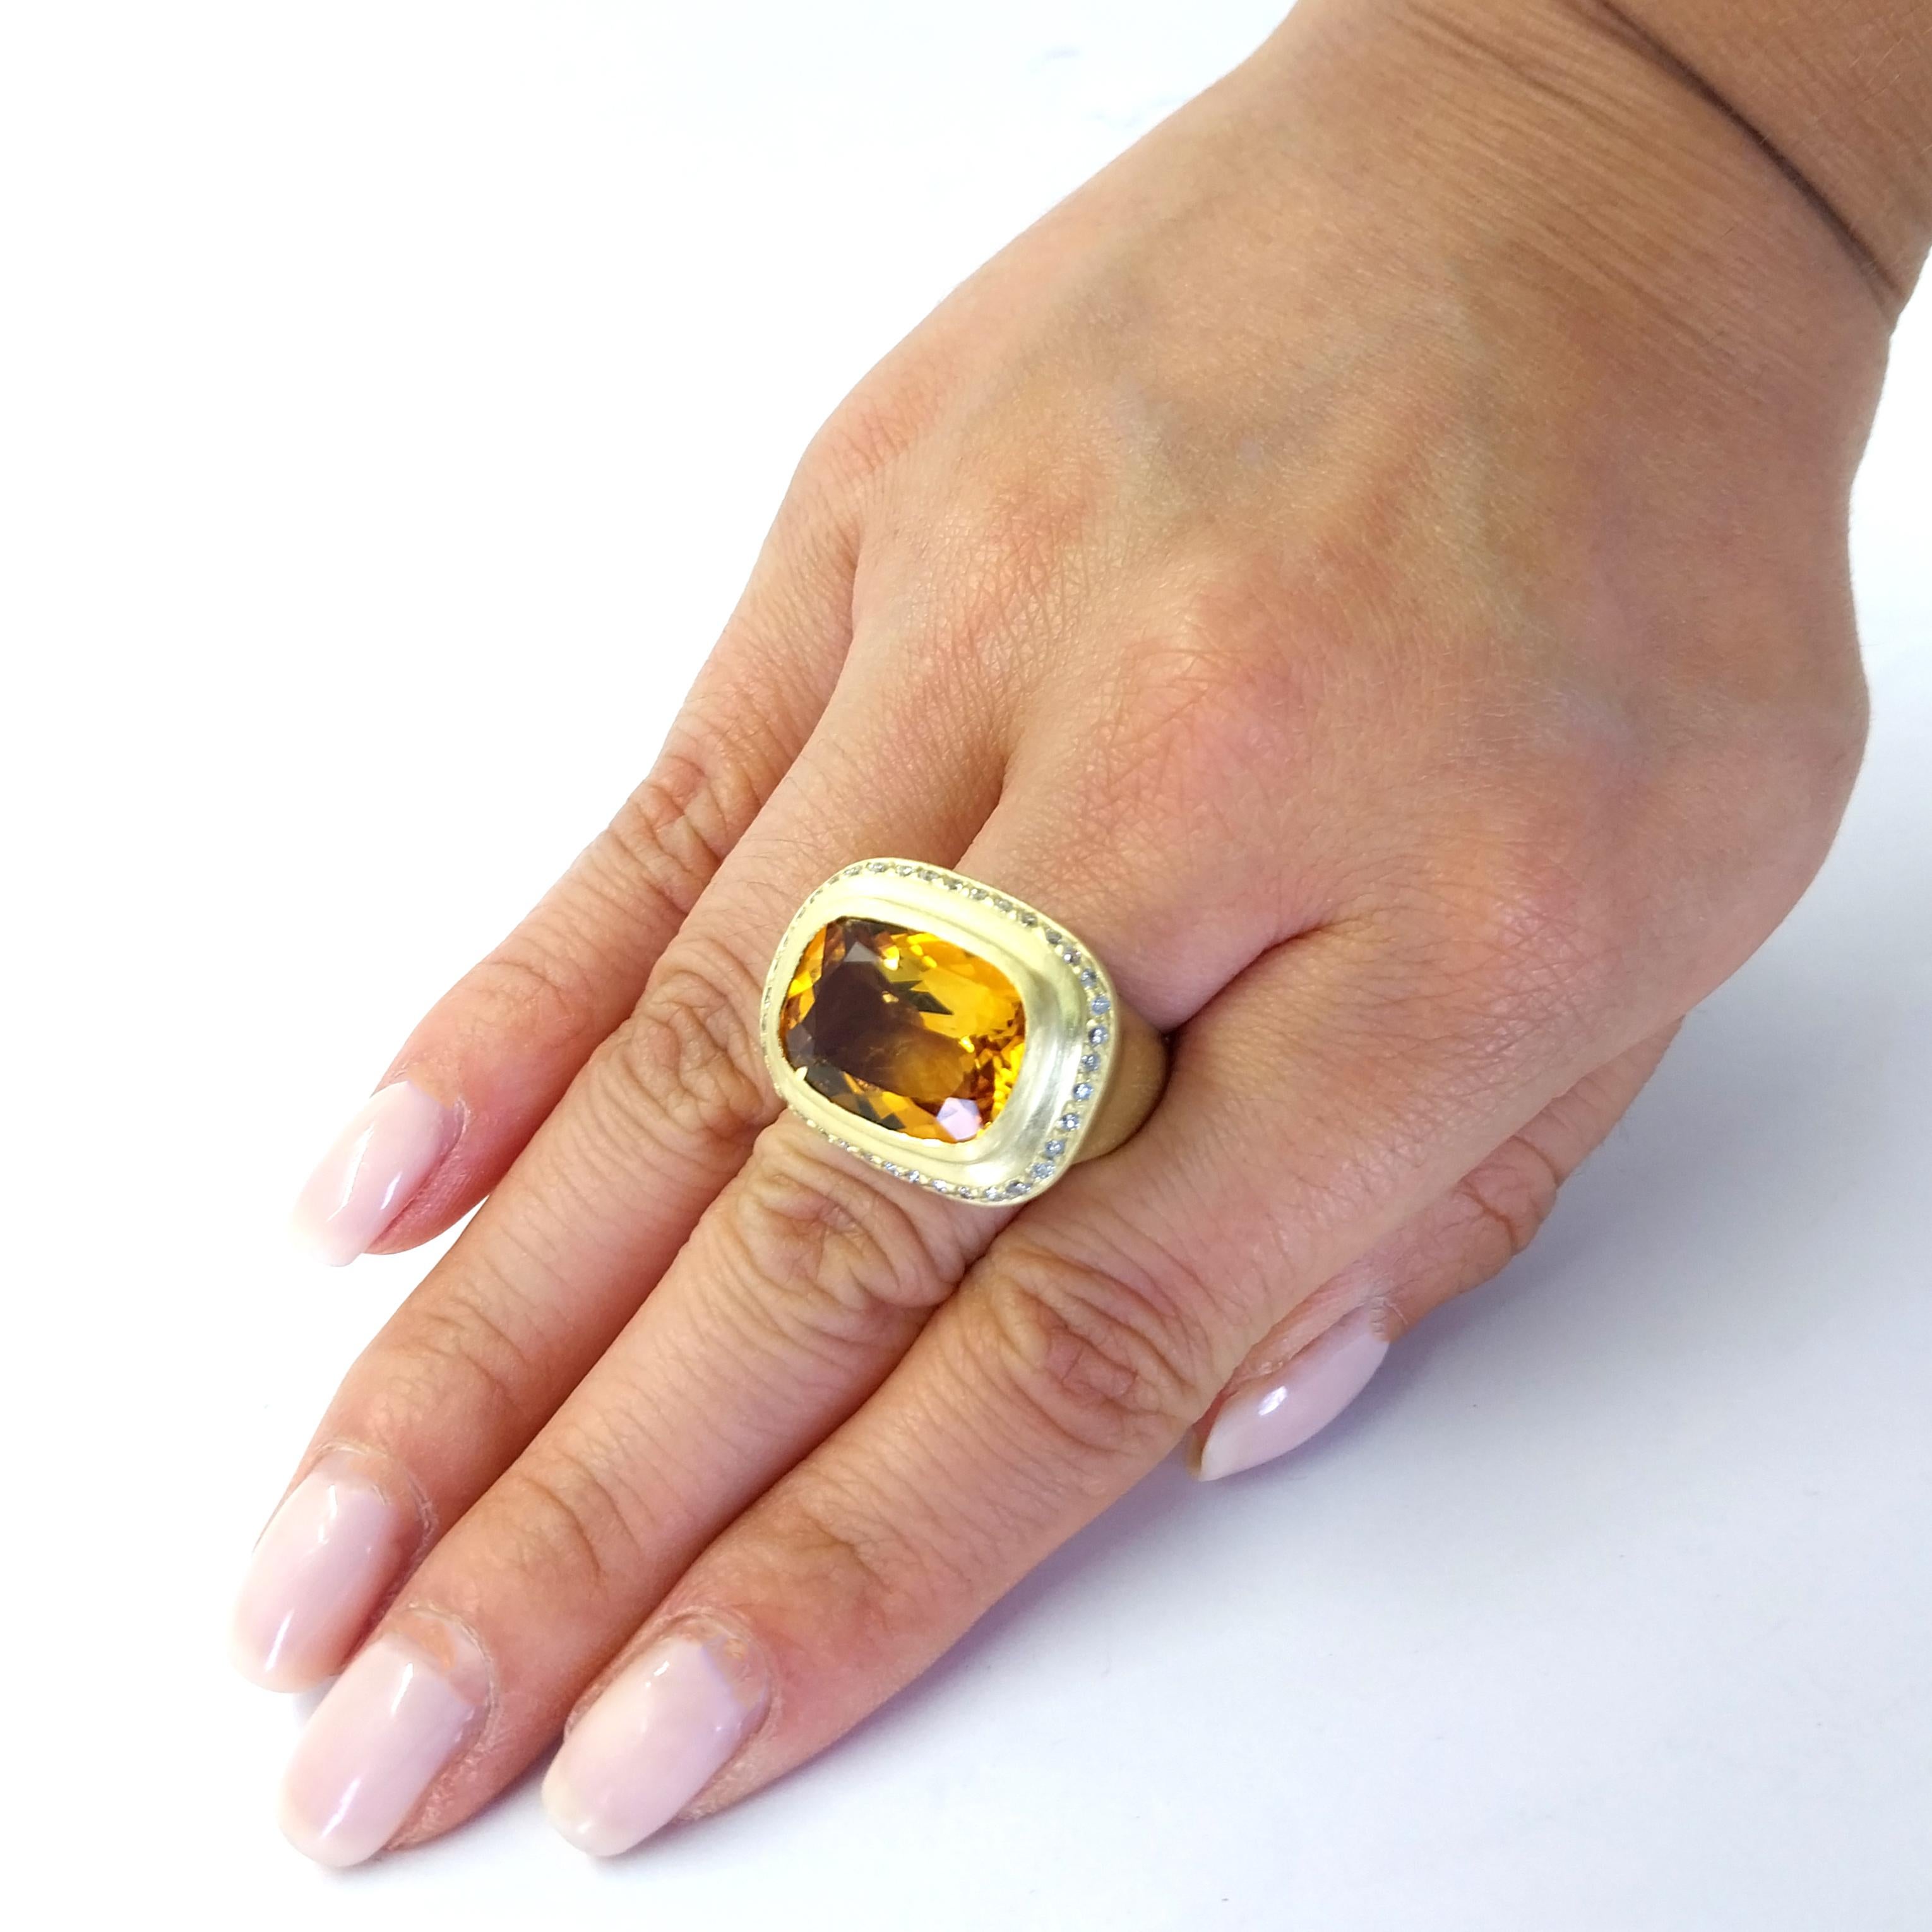 Luxurious 18 Karat Yellow Gold Brushed Finish Cocktail Ring Featuring A Bezel-set Cushion Cut Citrine Weighing Approximately 8 Carats Surrounded by 39 Round Brilliant Cut Diamonds of SI Clarity and H Color Totaling 0.39 Carats. Finger Size 7.5.